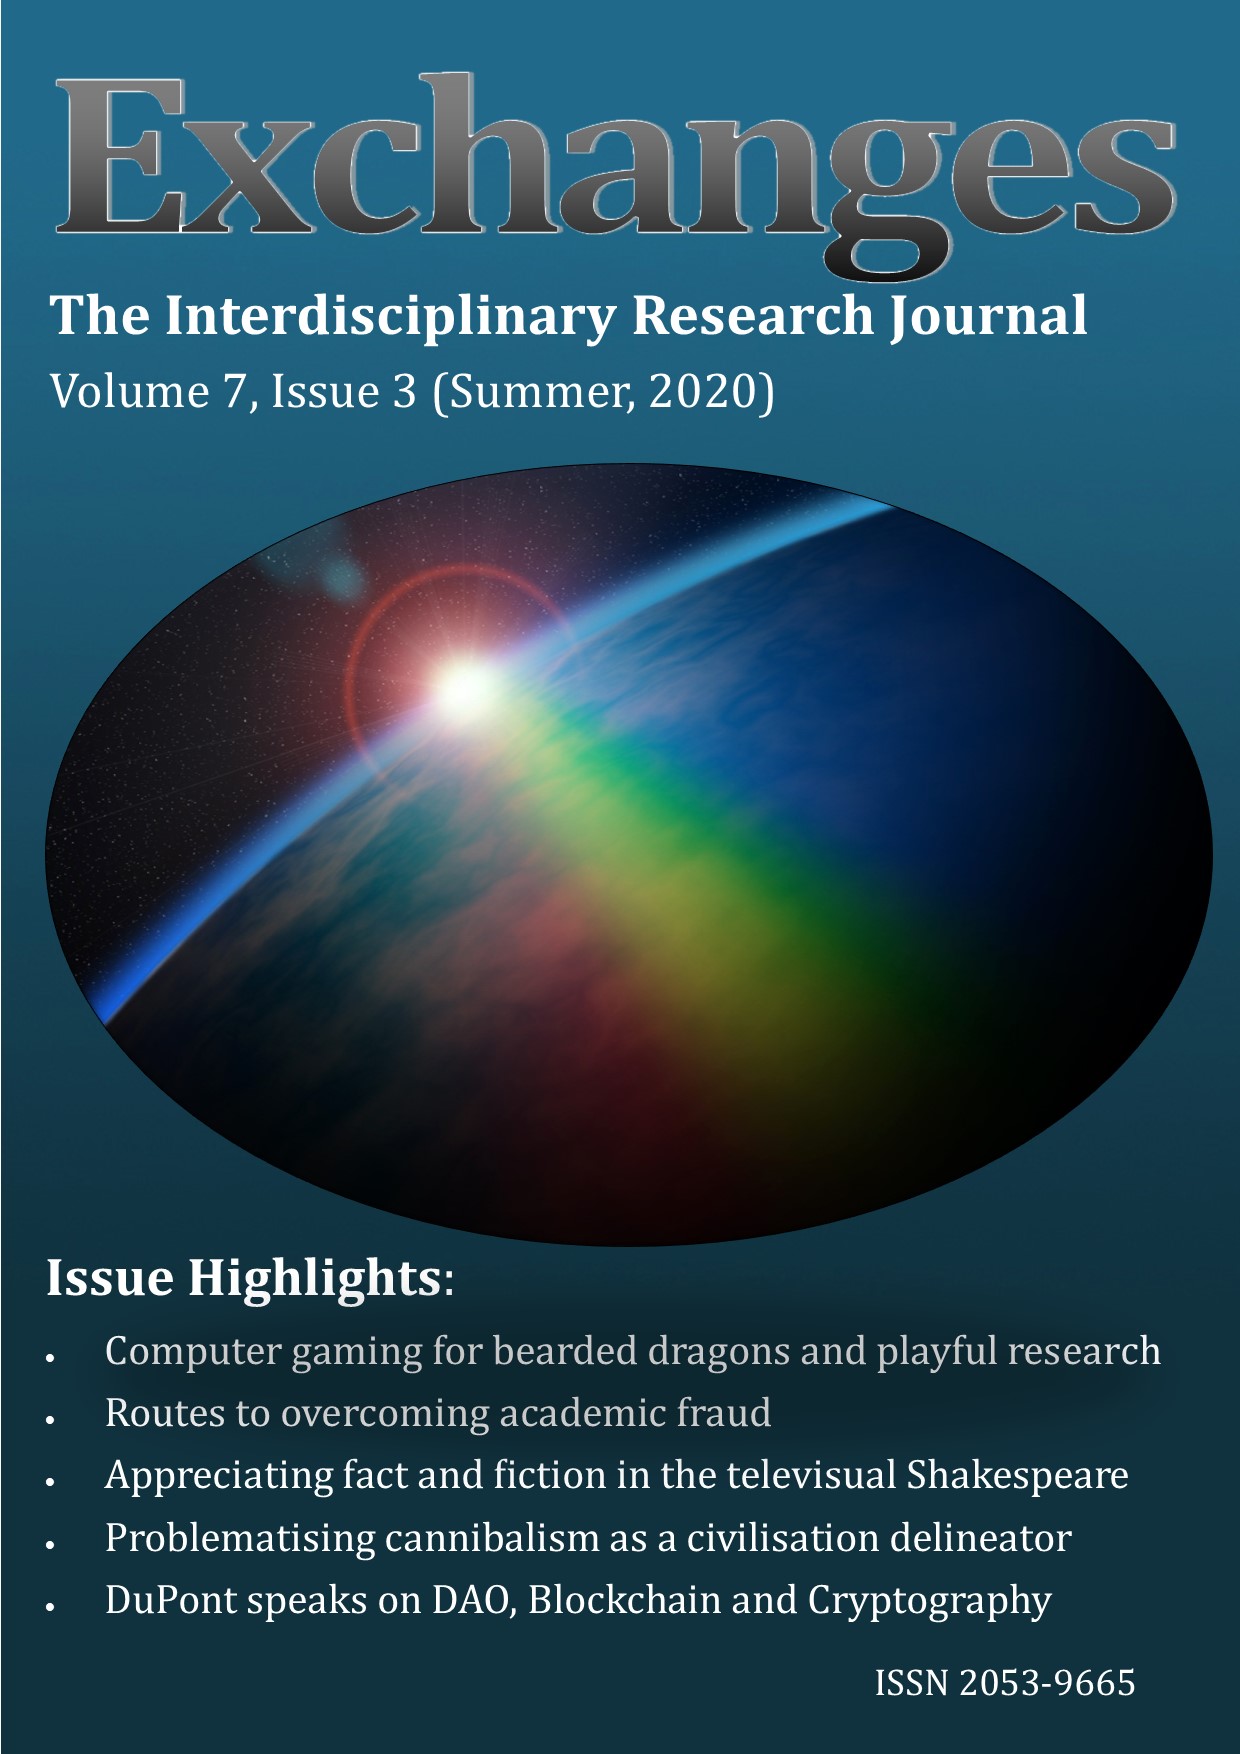 Cover of Exchanges journal issue 7.3